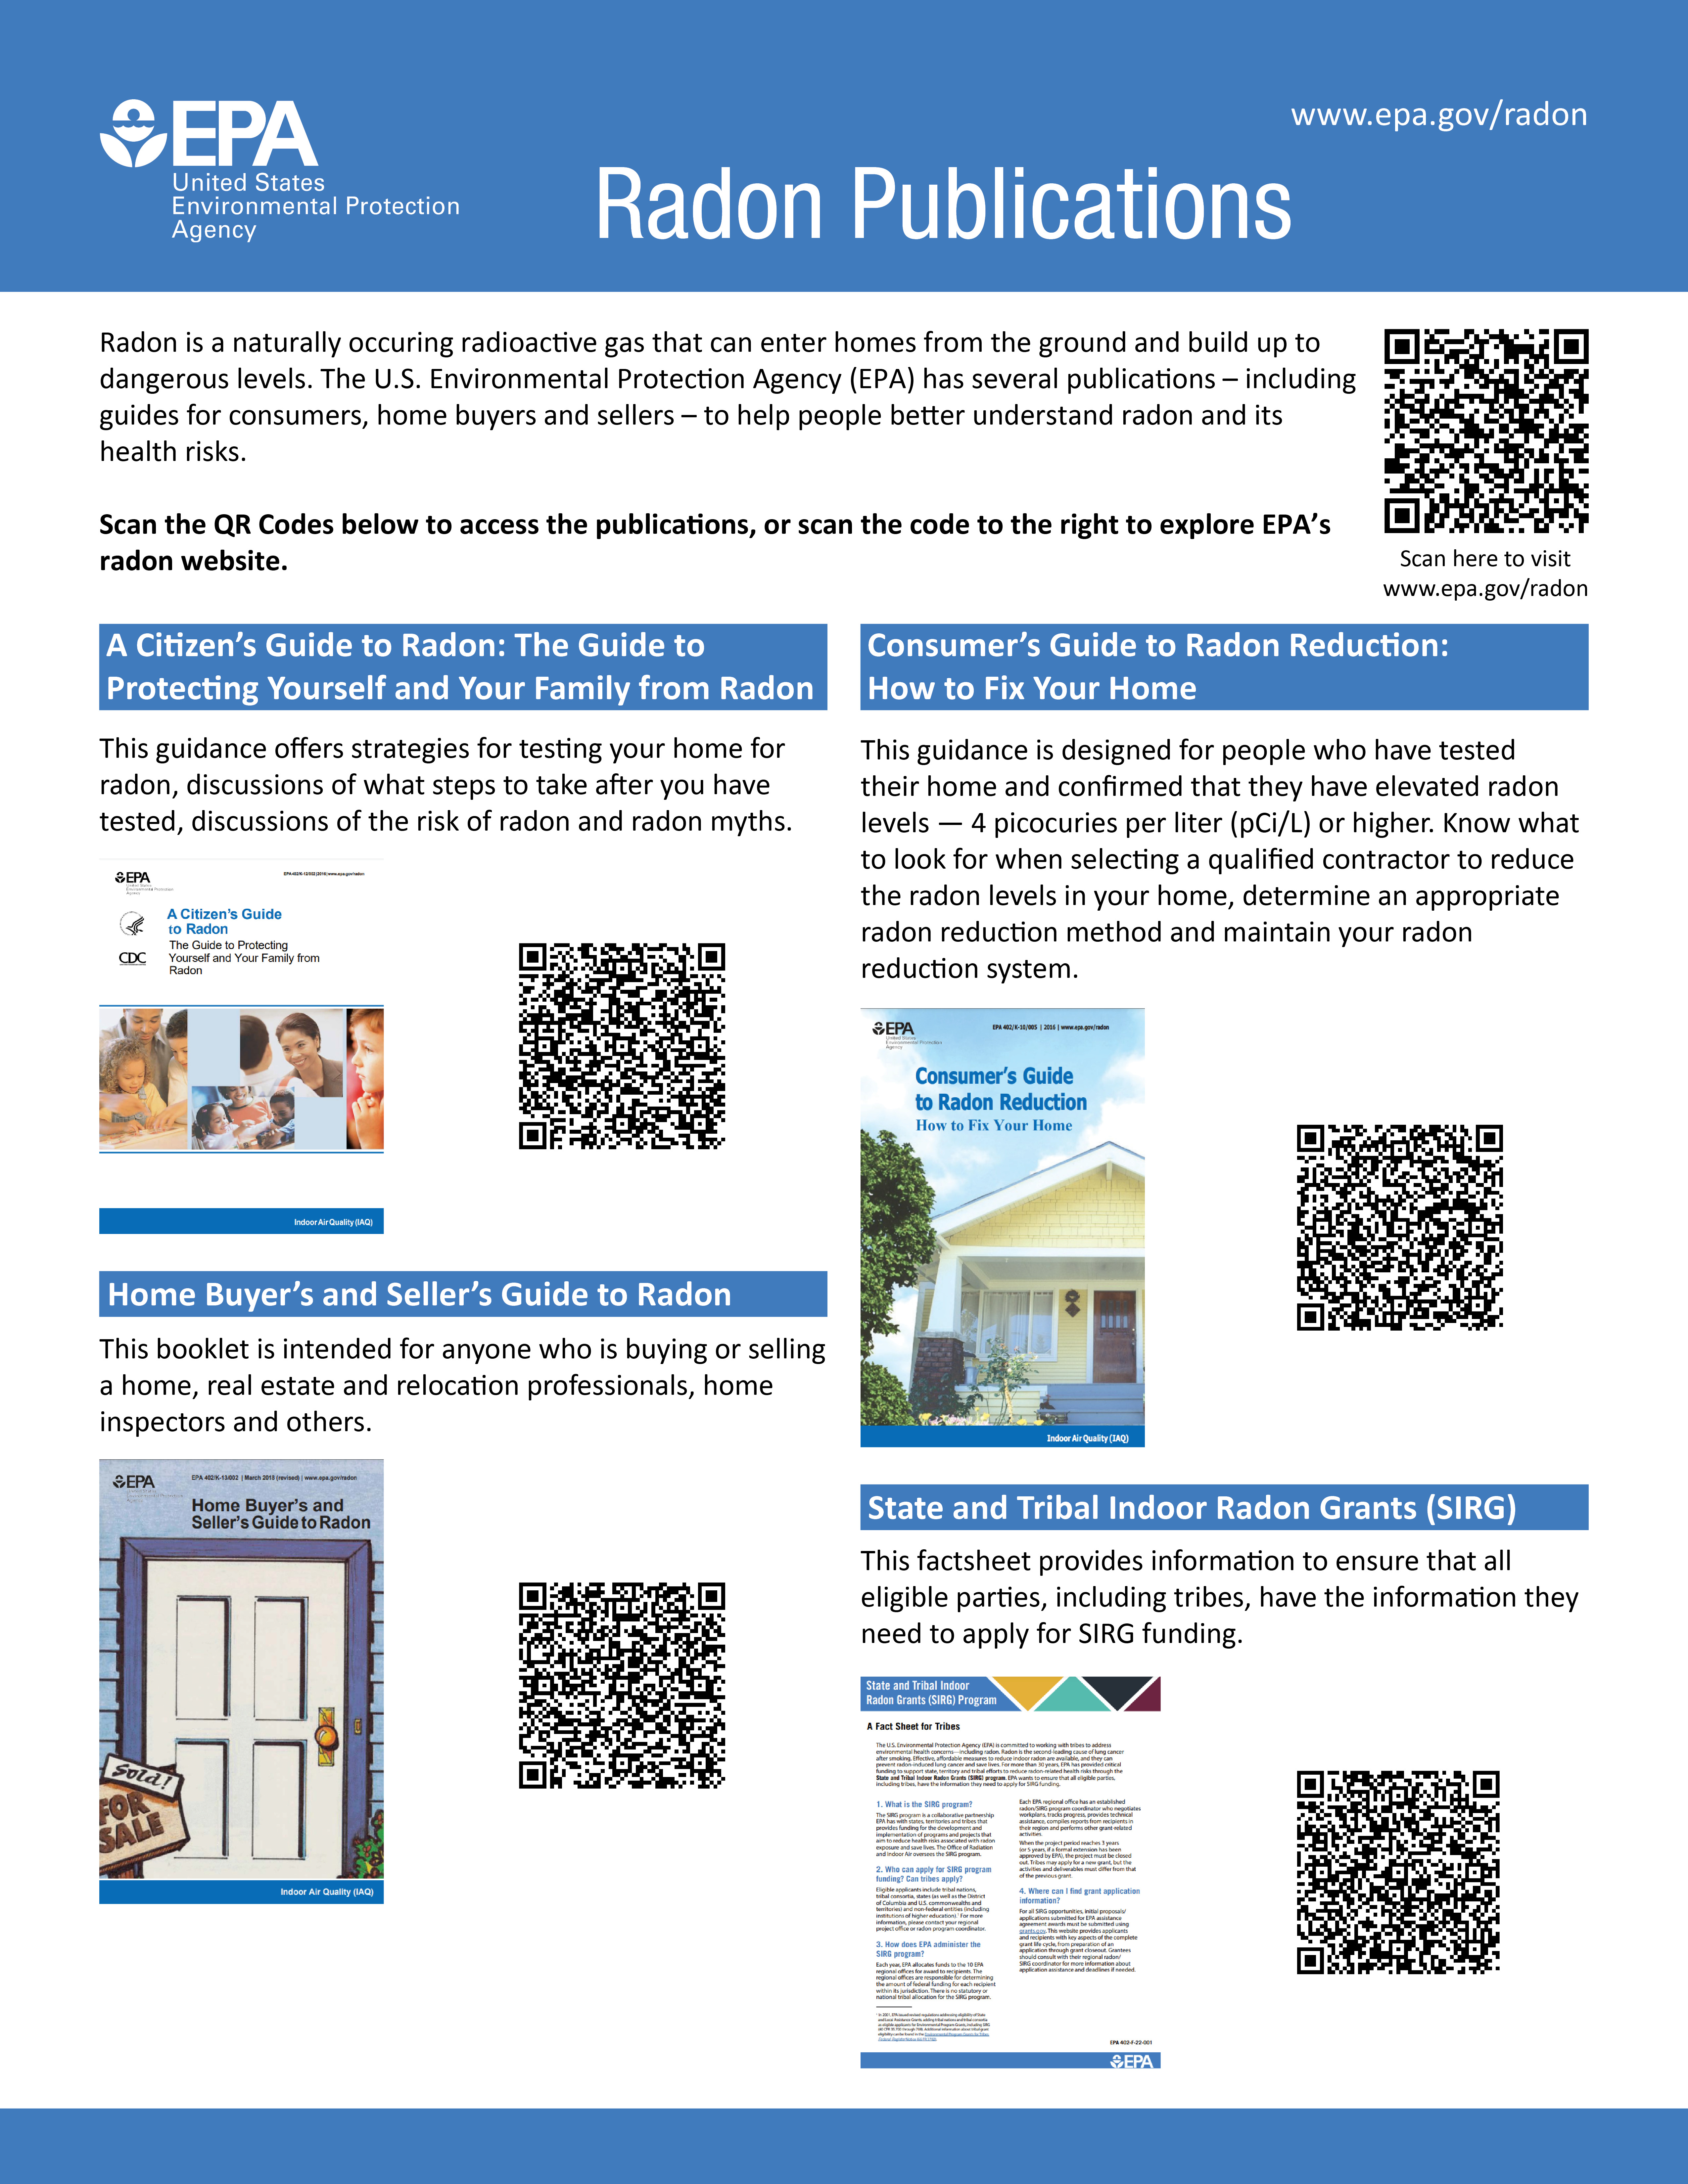 image of the radon publications one-pager